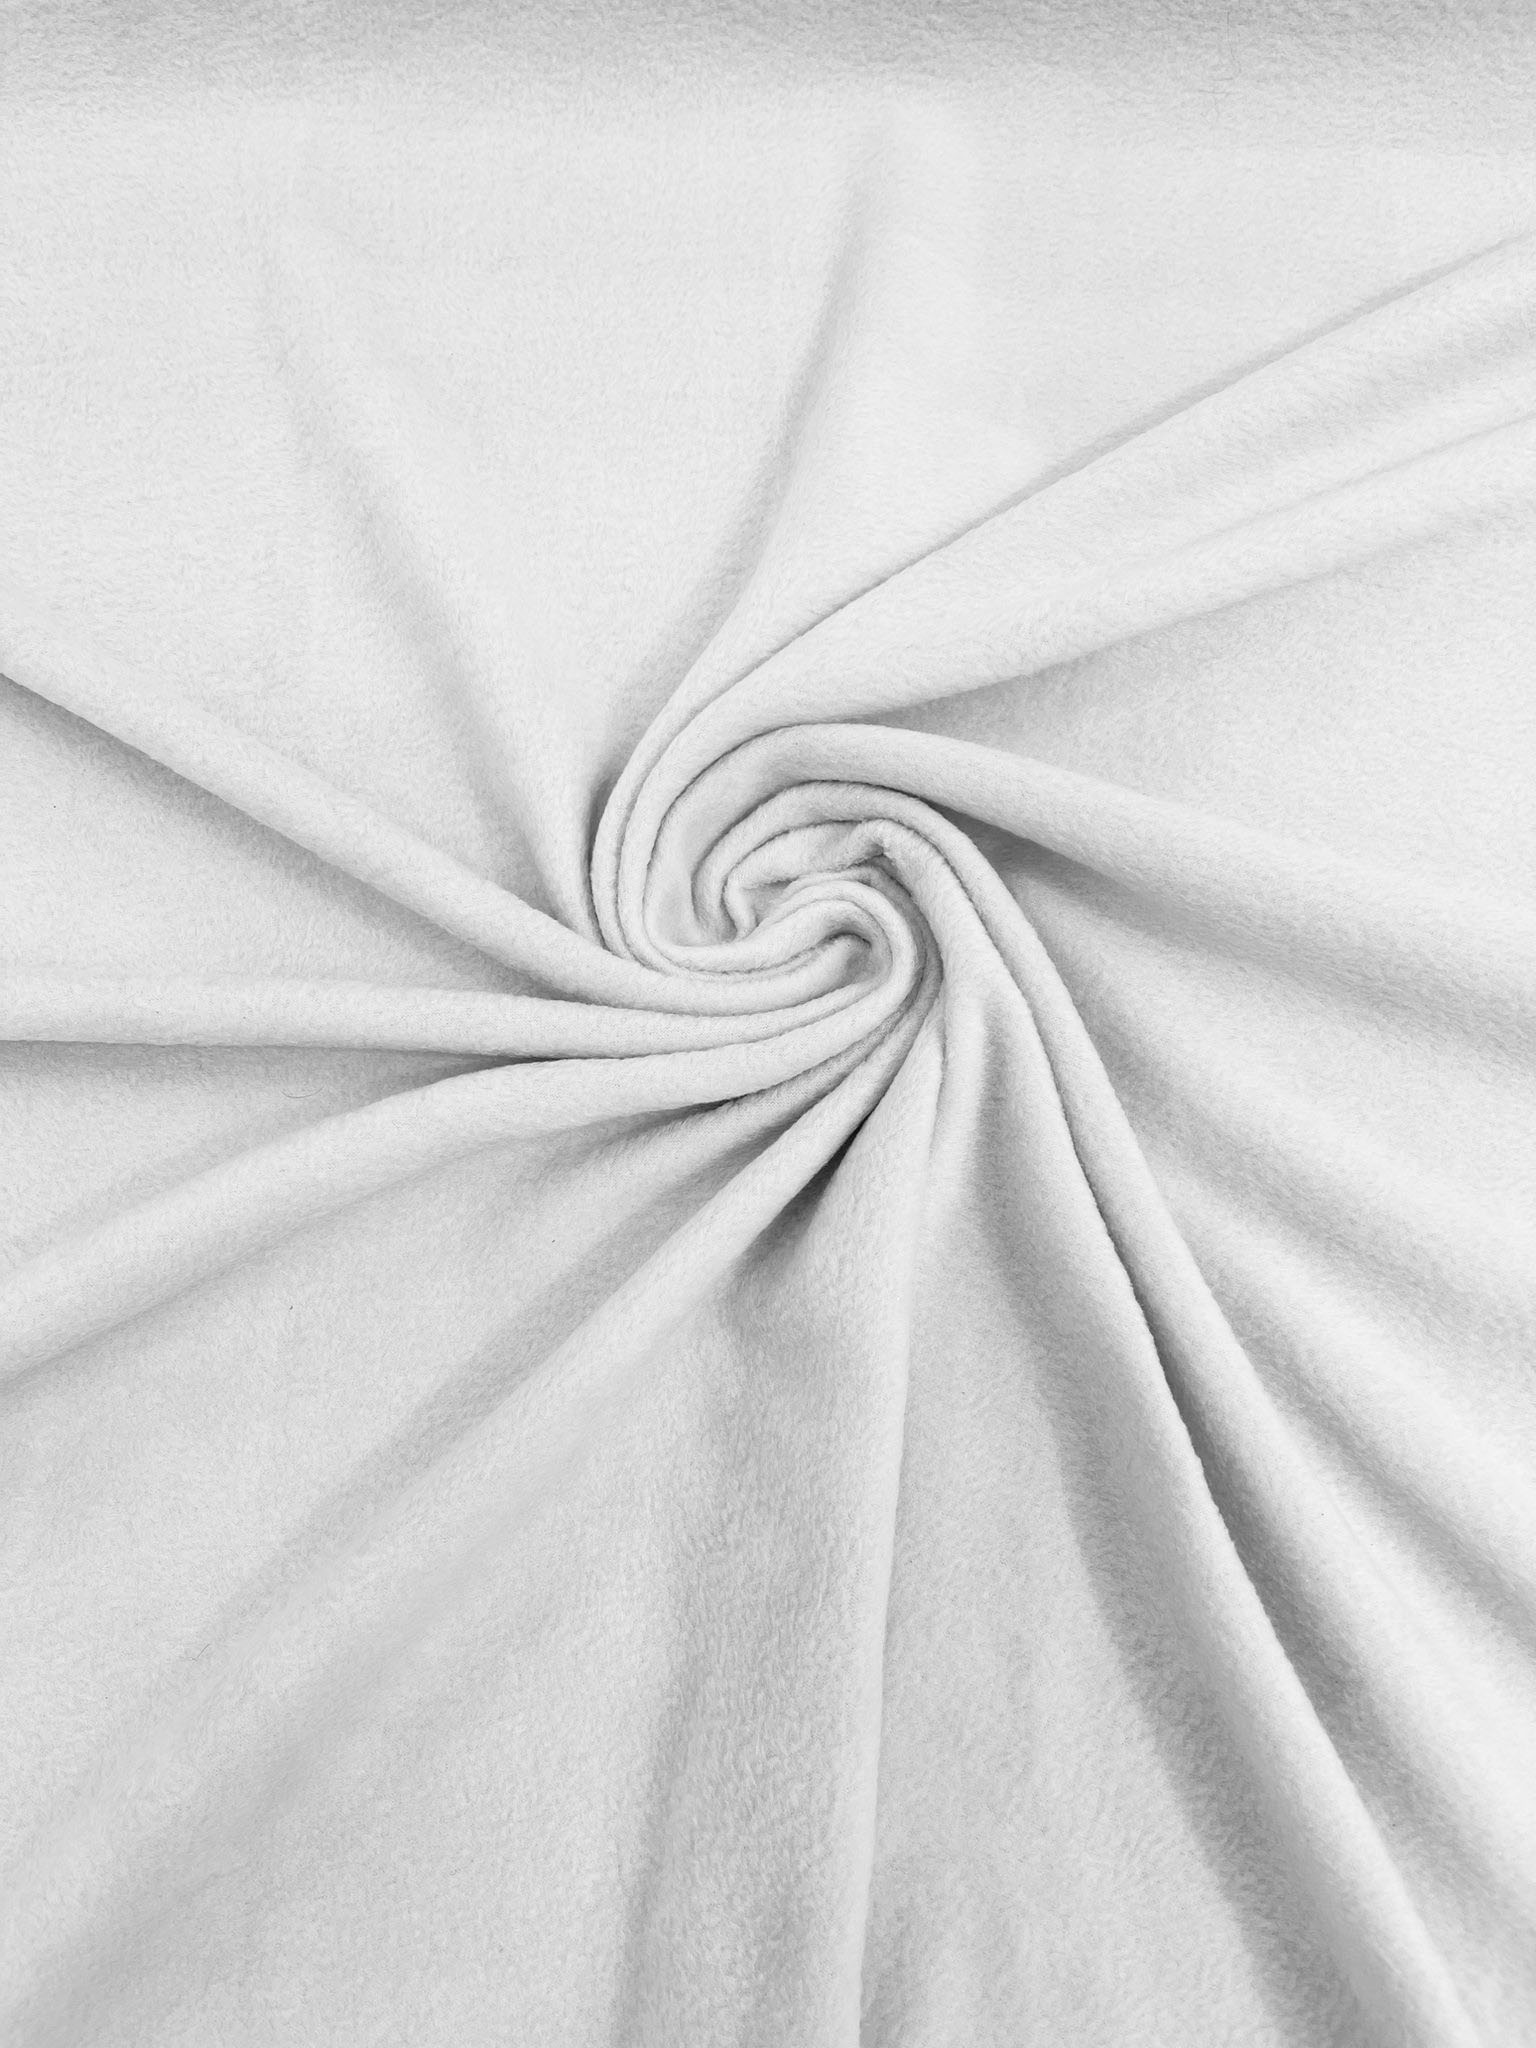 White Solid Polar Fleece Fabric Anti-Pill 58" Wide Sold by The Yard